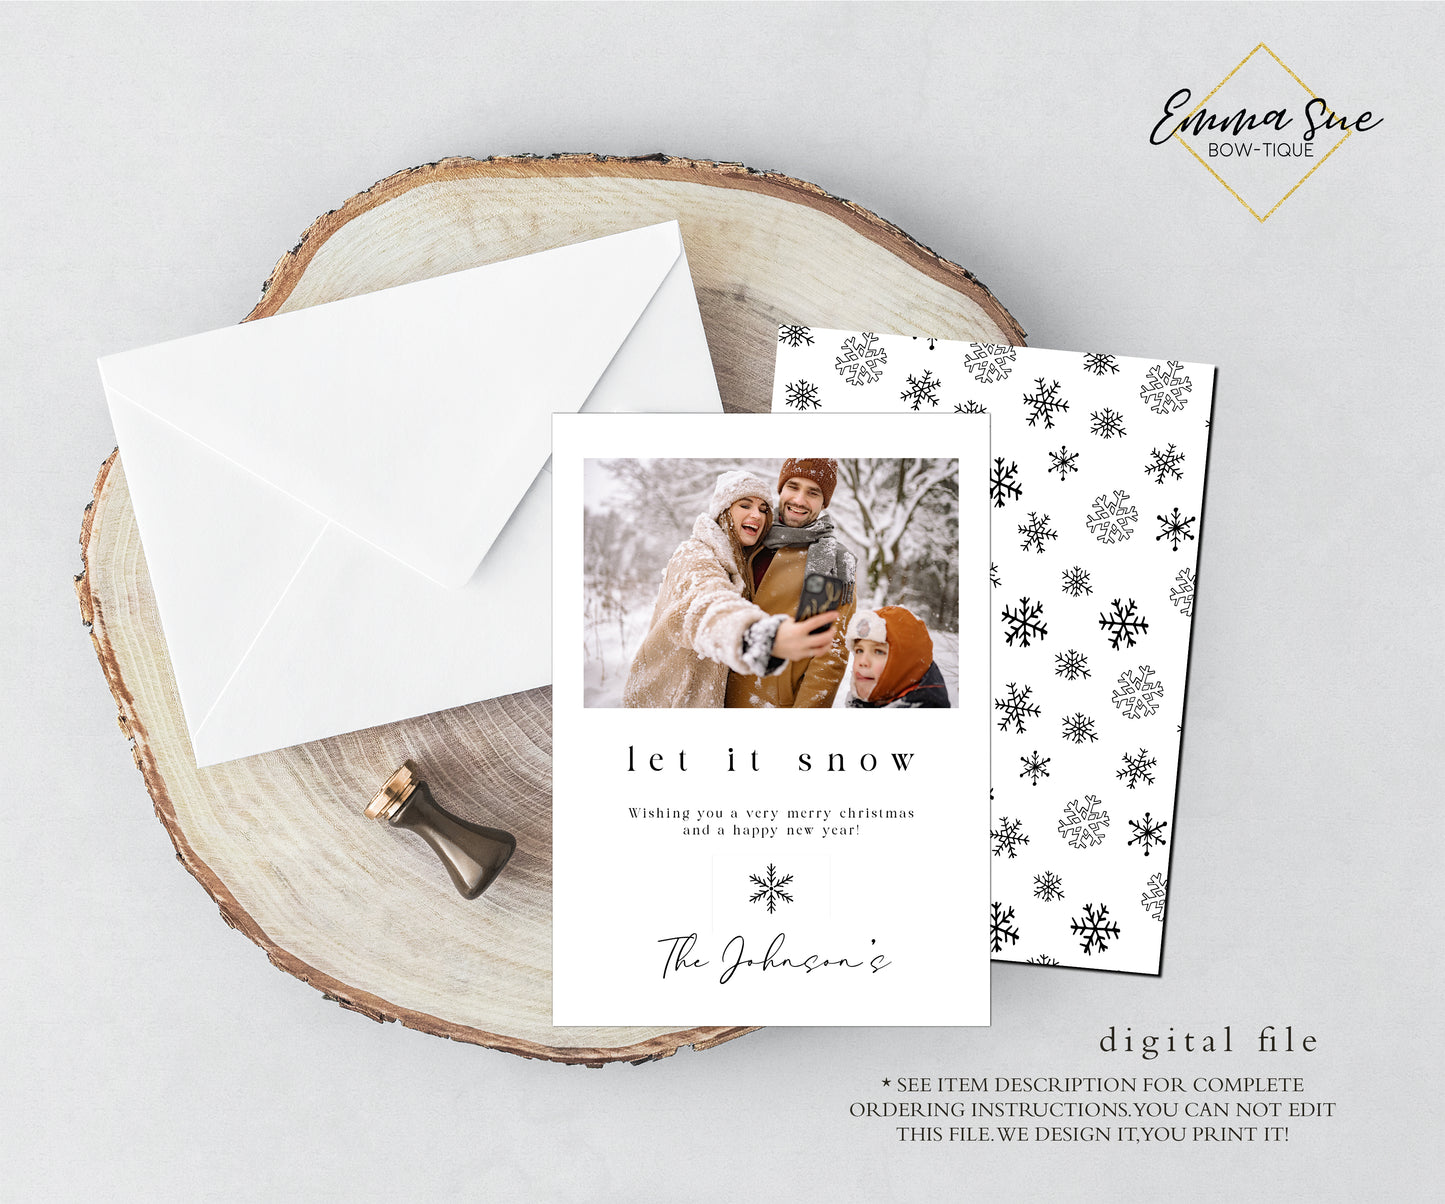 Let it snow snowflake Minimalist Christmas Card  - Family Photo Holiday card - Digital File (let-snow))